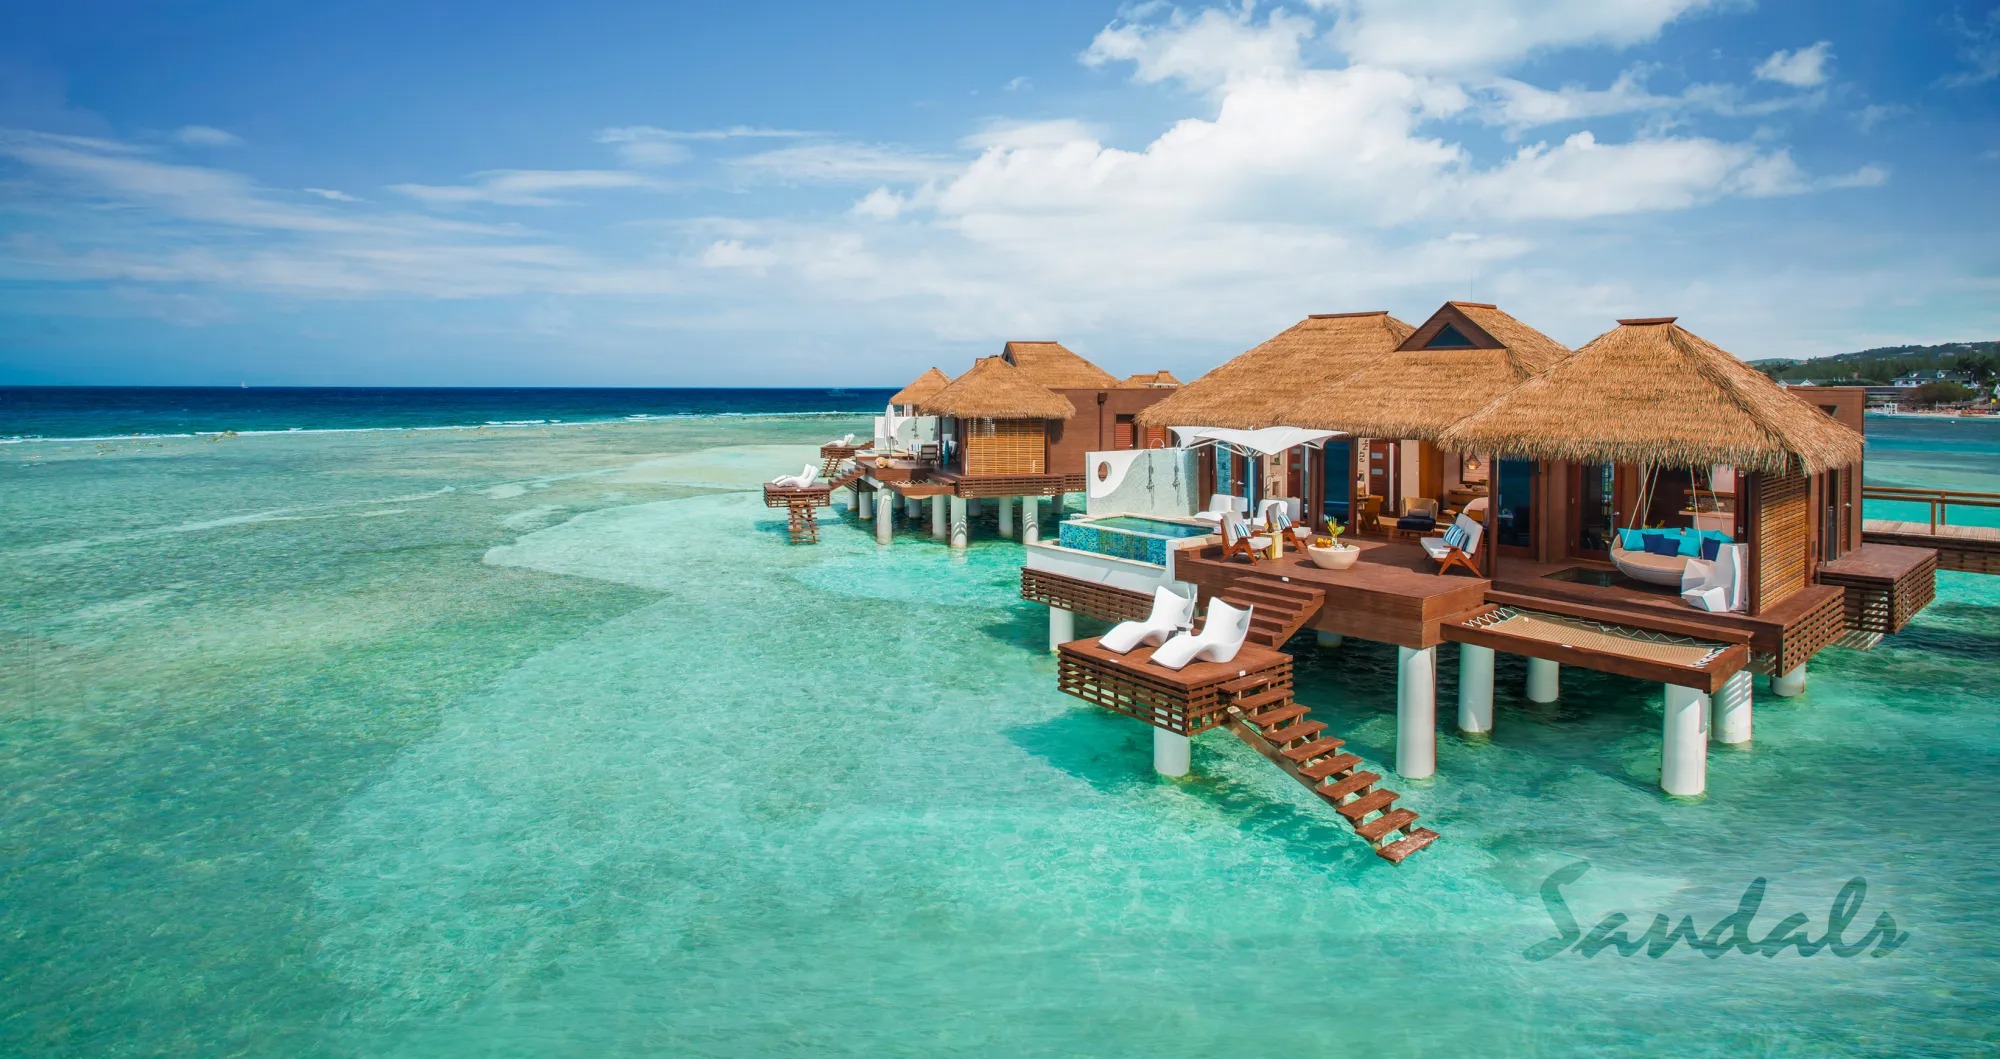 Thatched-roof overwater bungalows of a Royal Caribbean resort stretch out over a crystal clear sea, enhanced by a stunning blue skies in the background_